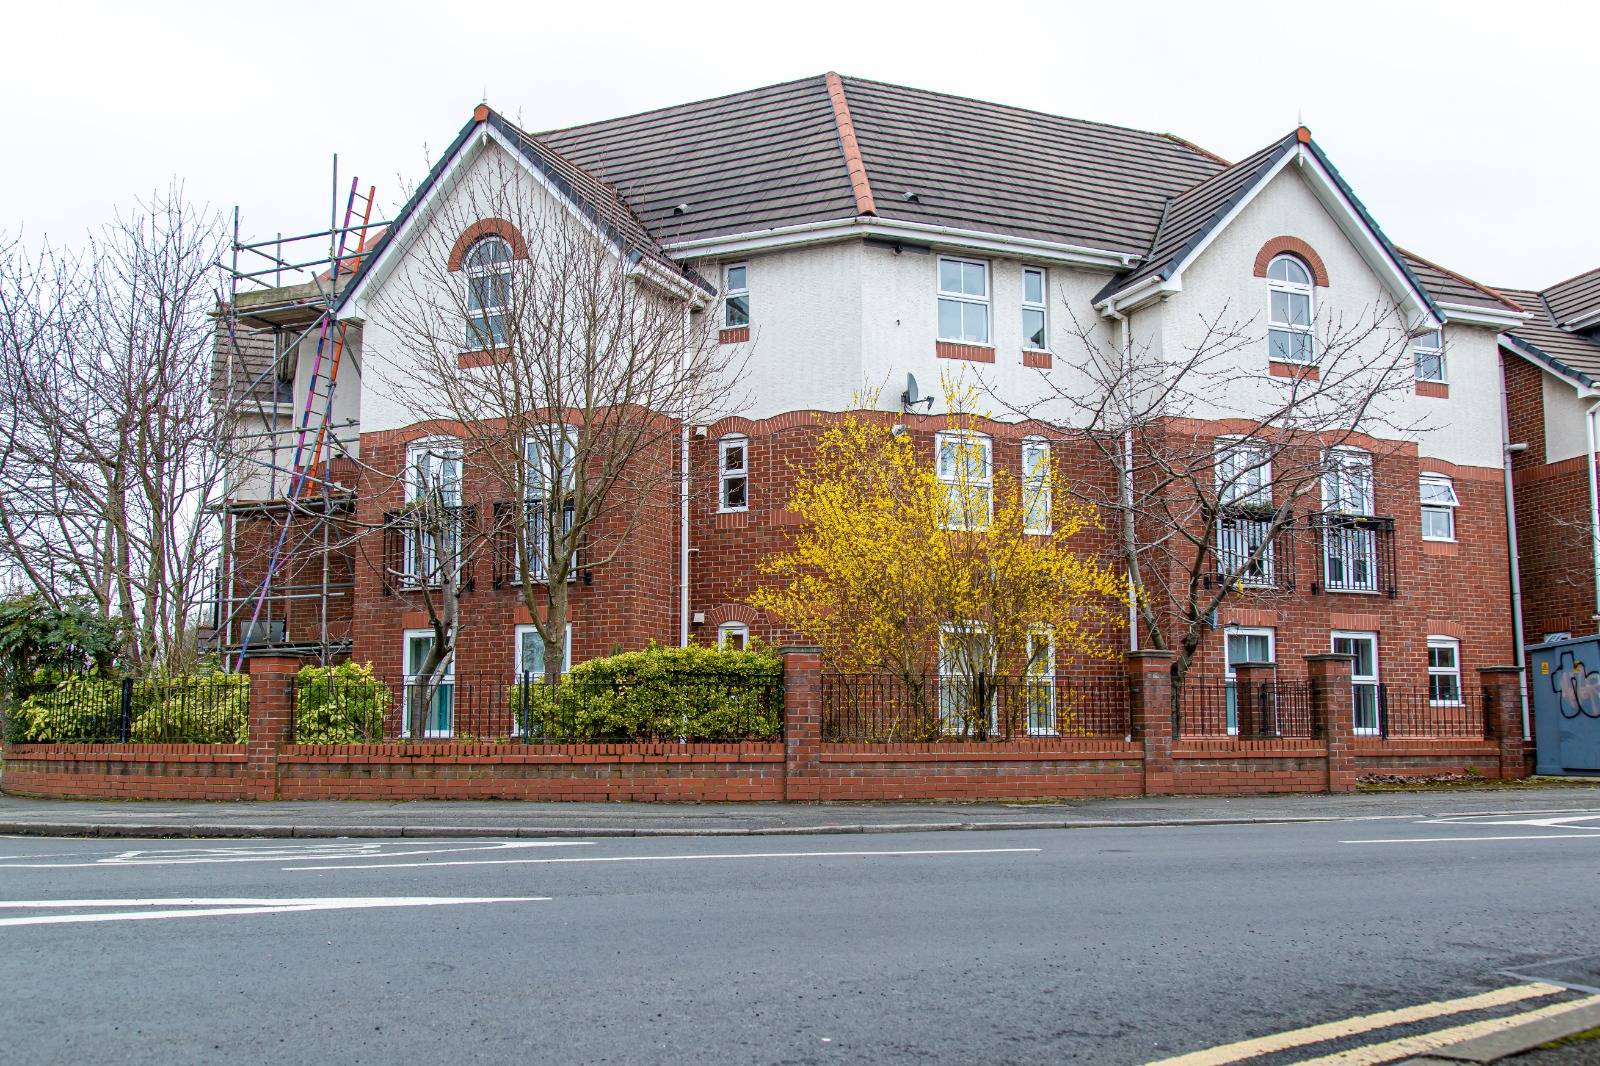 A well-presented two double bedroom apartment in a contemporary development within a short distance from both Didsbury and Withington villages.